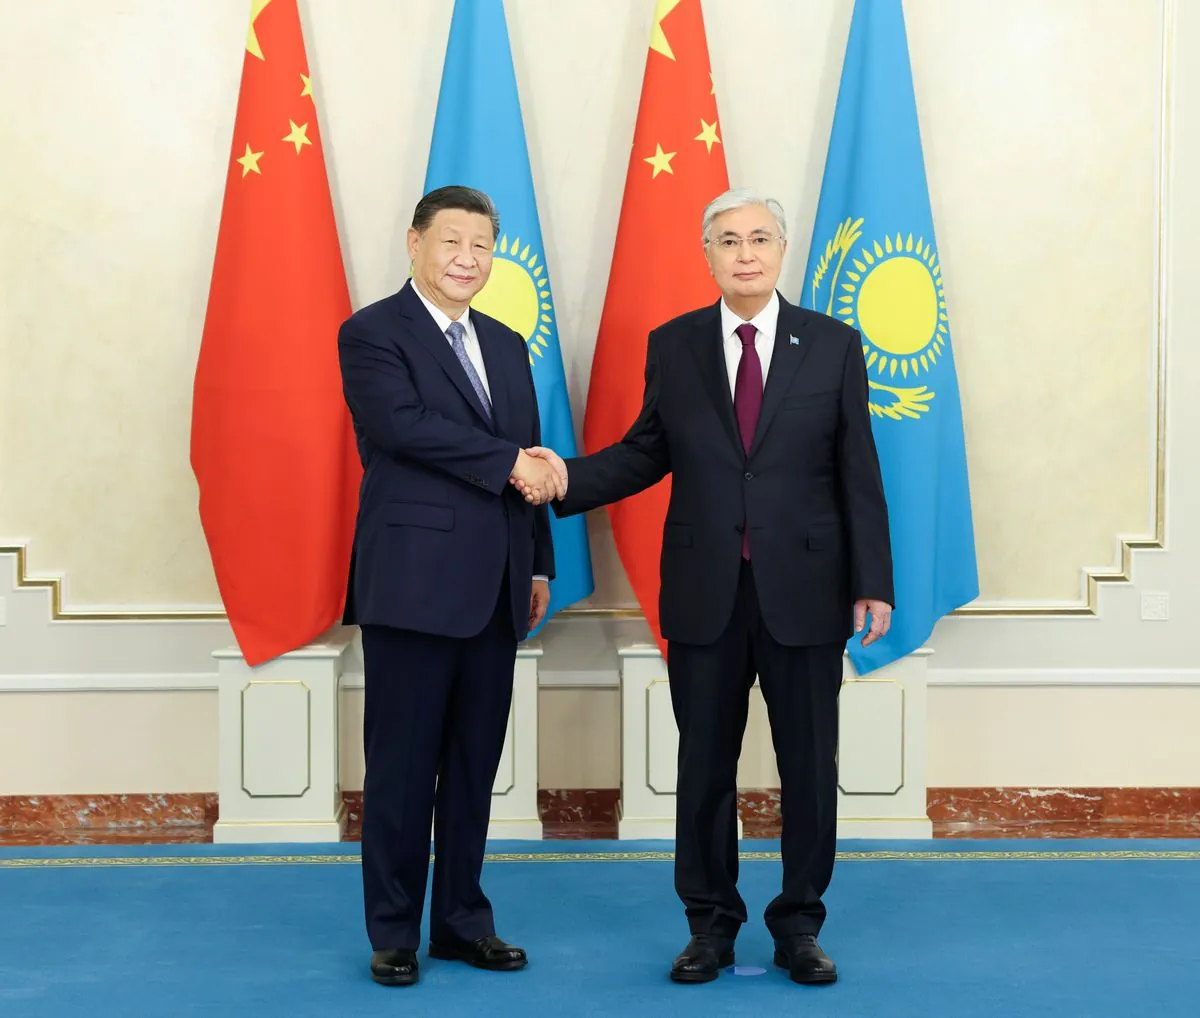 Xi Jinping meets with Tokayev: declares high level of "comprehensive strategic partnership"